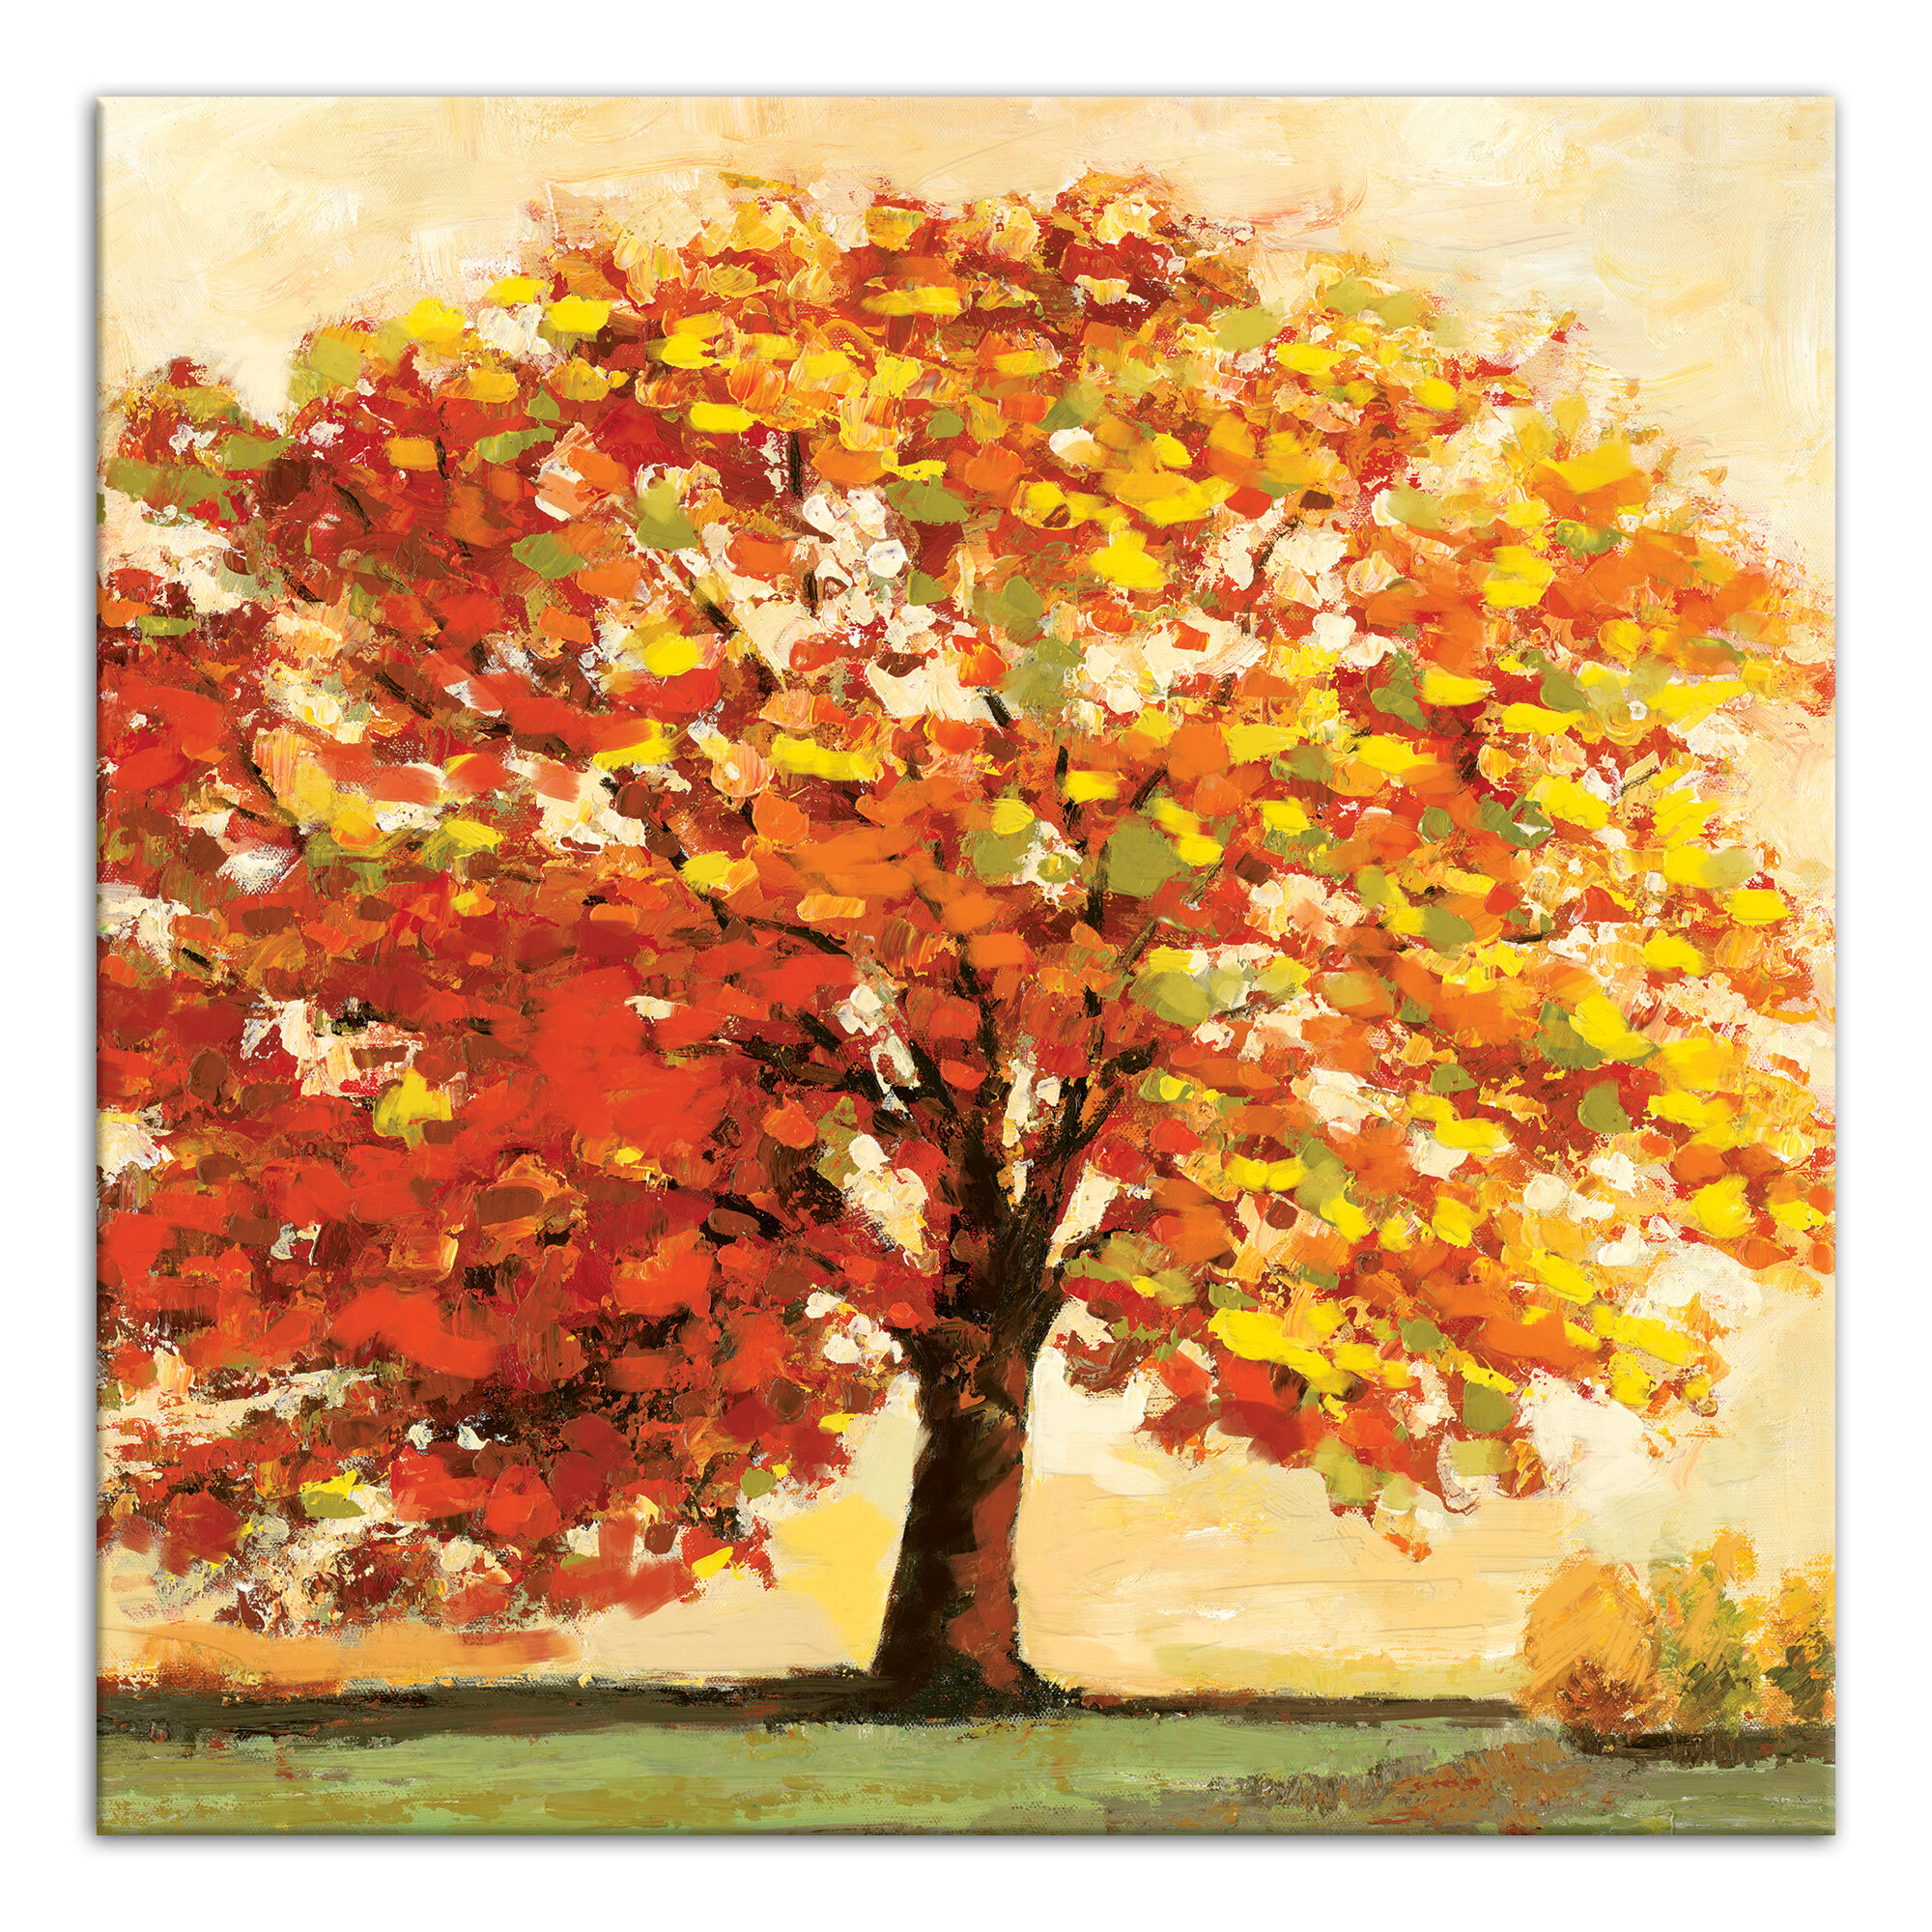 Fall Trees  Autumn Colors  Sunset Painting  small Painting  Wall Art  Home Decor  original art  Mountains  Trees